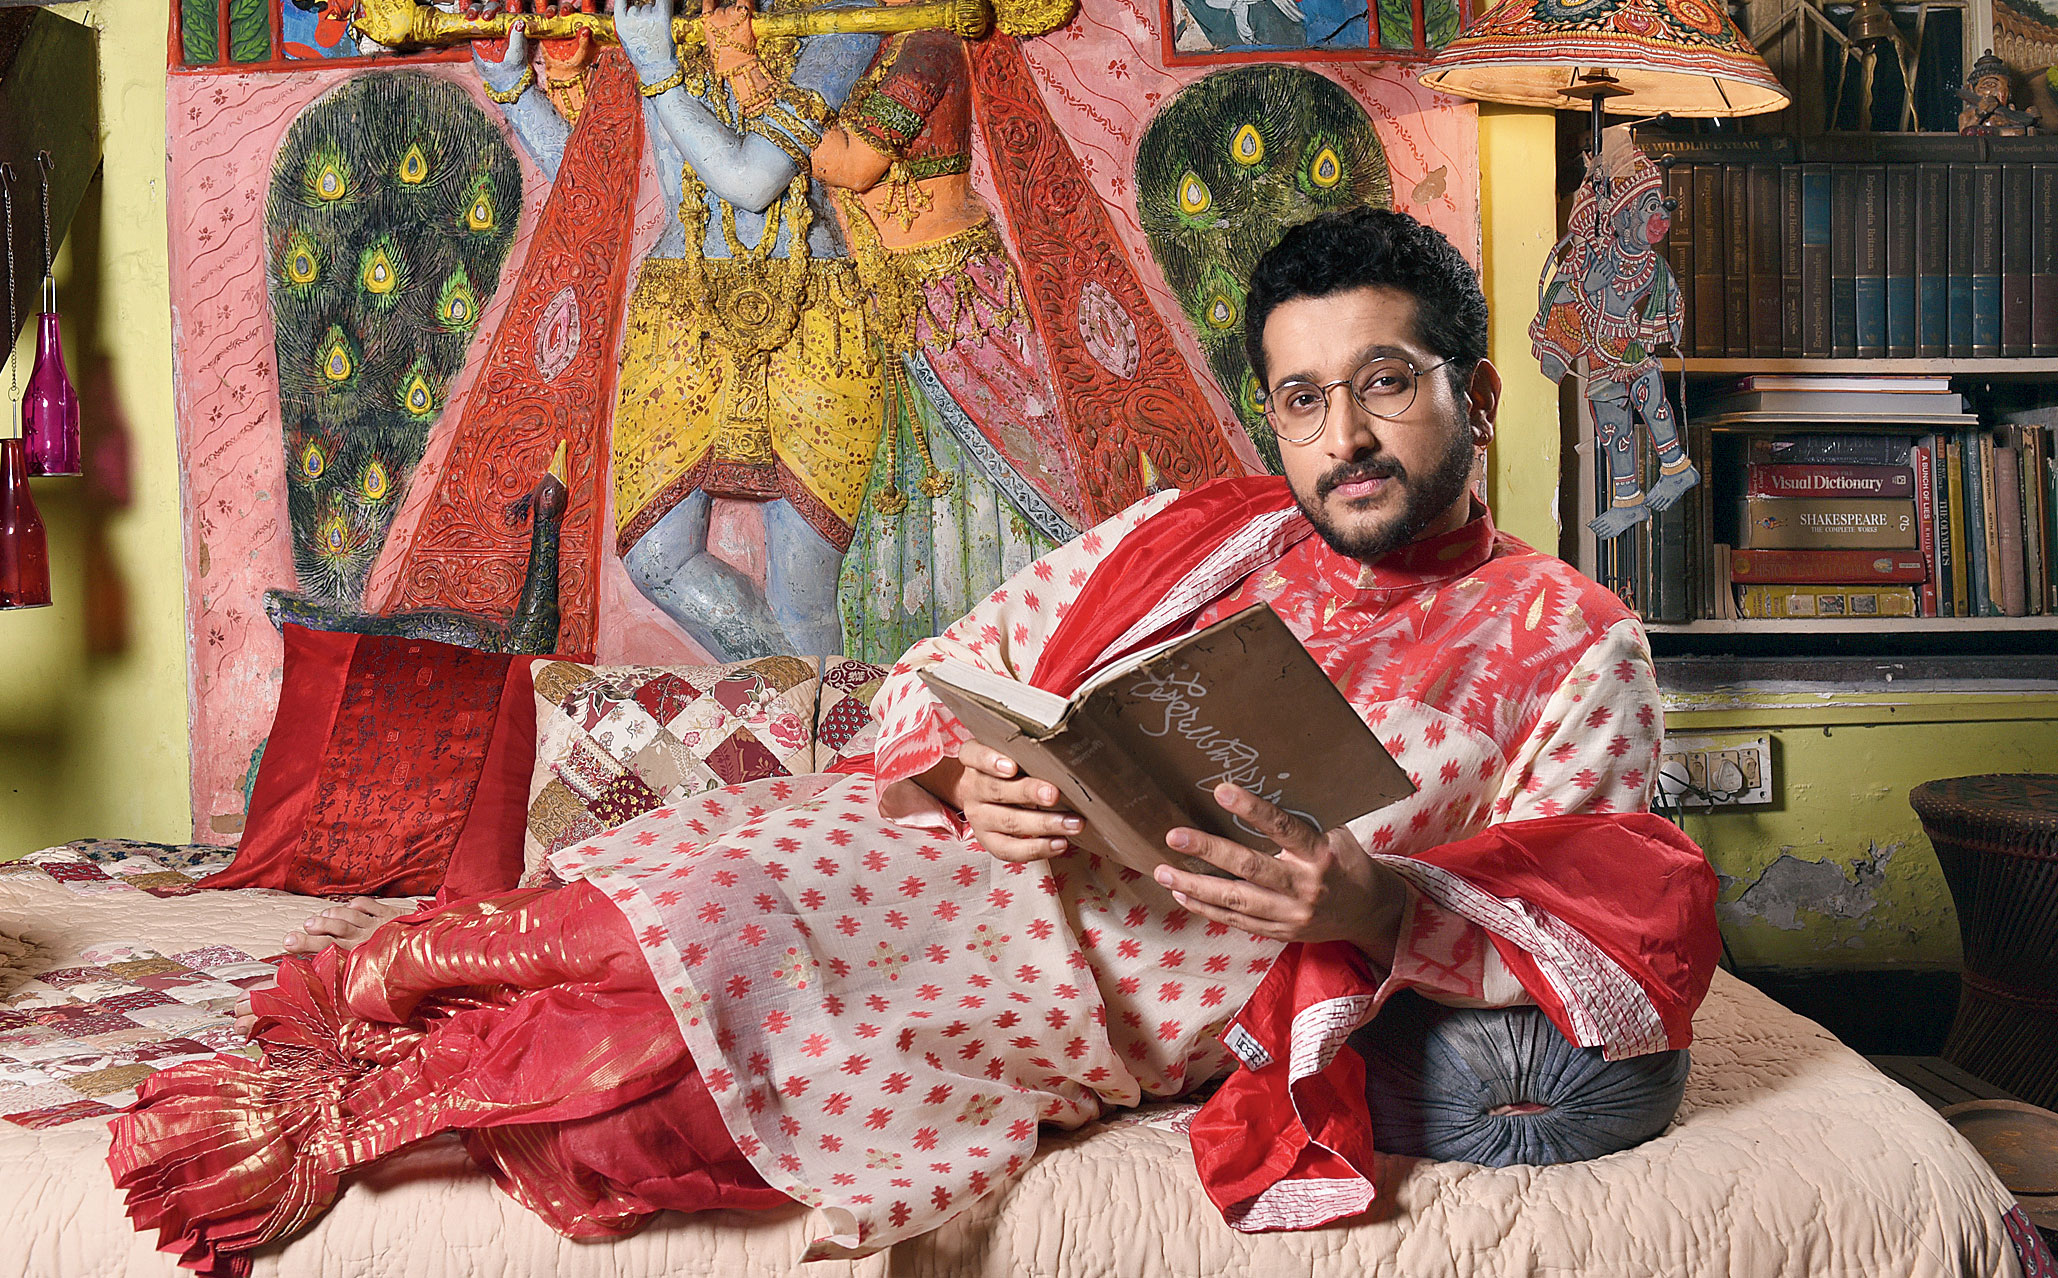 Parambrata looked every bit the Bangali babu in a traditional red-and-white Dhakai kurta paired with a hand-embroidered red dhoti. The look is ideal for Ashtami anjali.